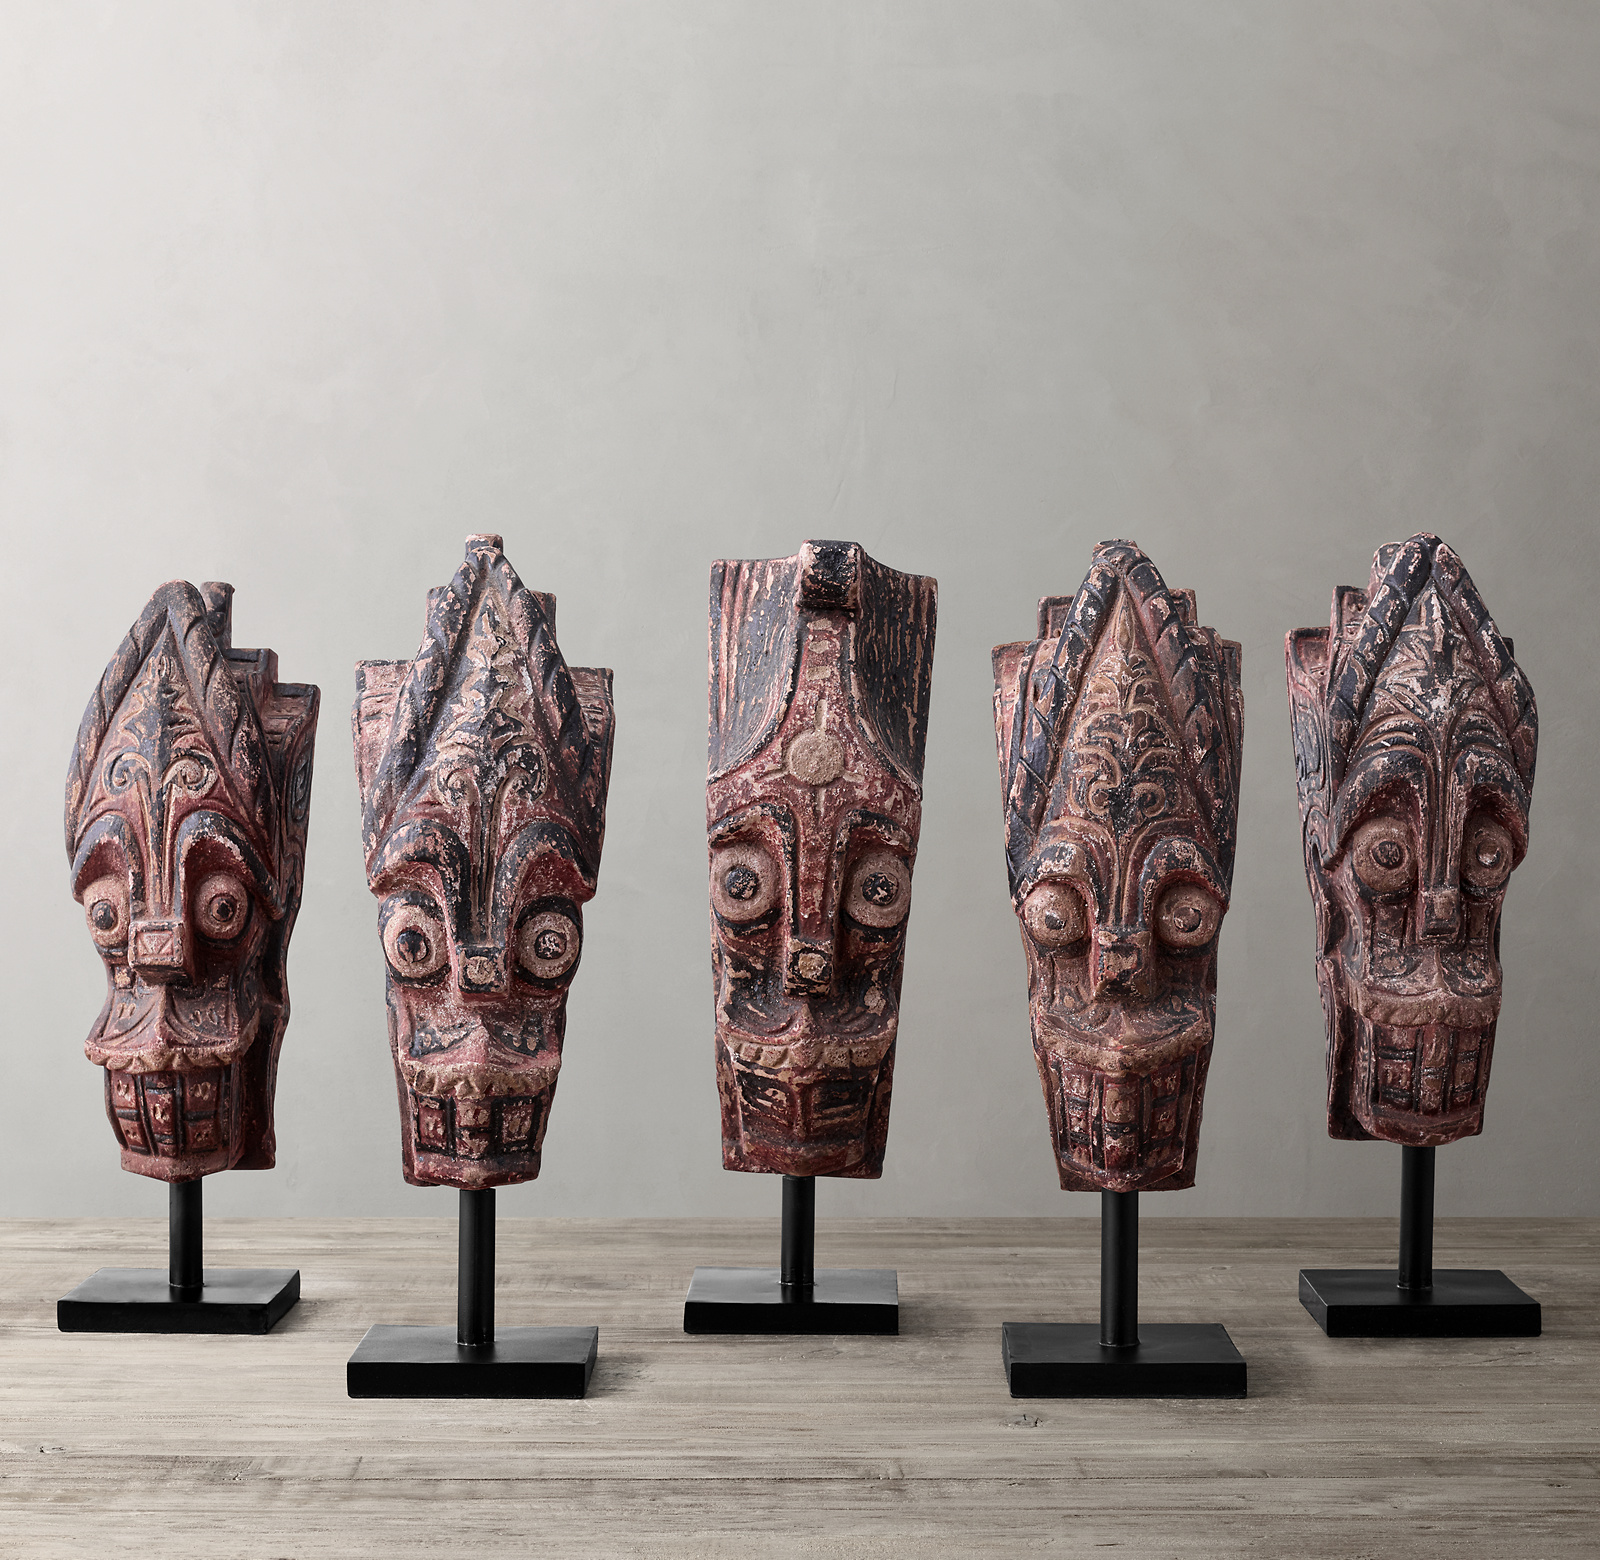 Each hand-carved original is one of a kind. Representative carvings shown.